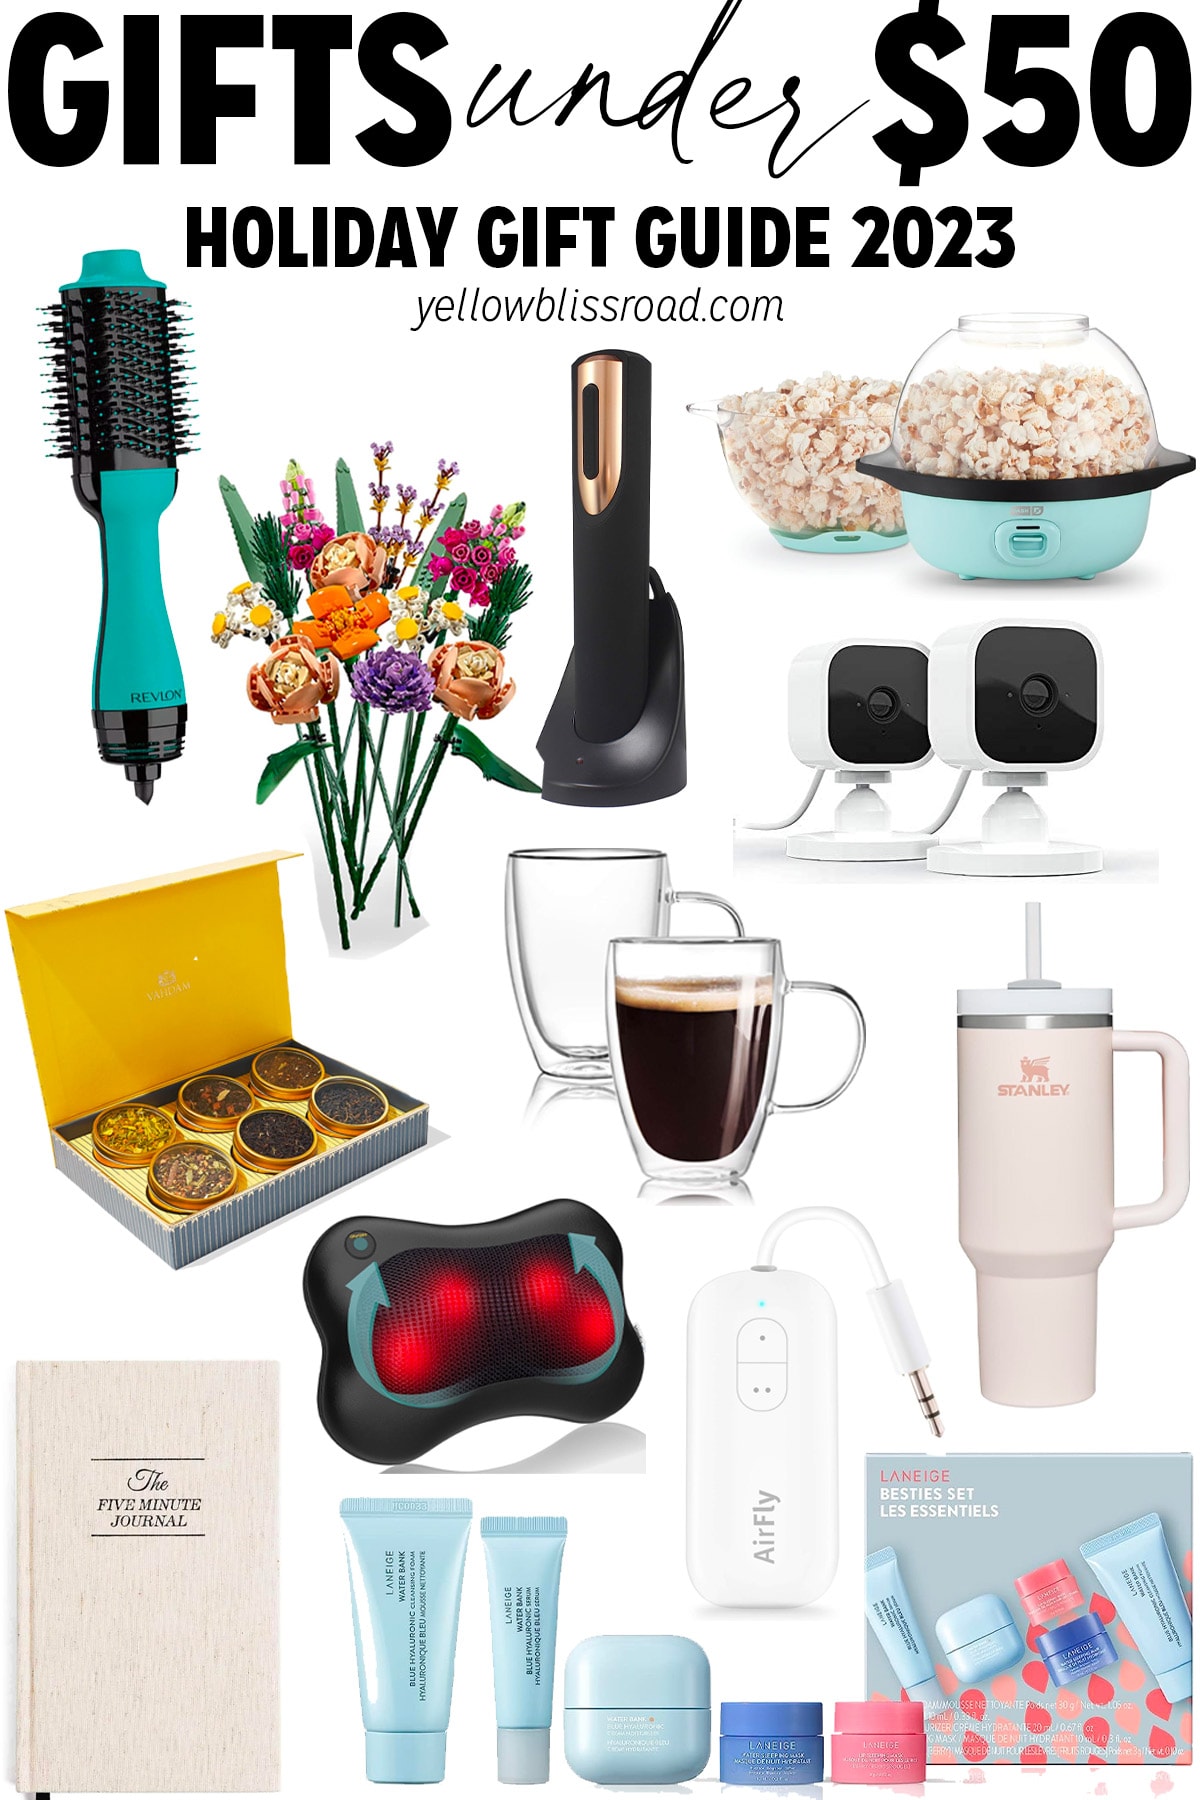 50 Best Gifts Under $50 in 2023 - Christmas Gifts Under $50